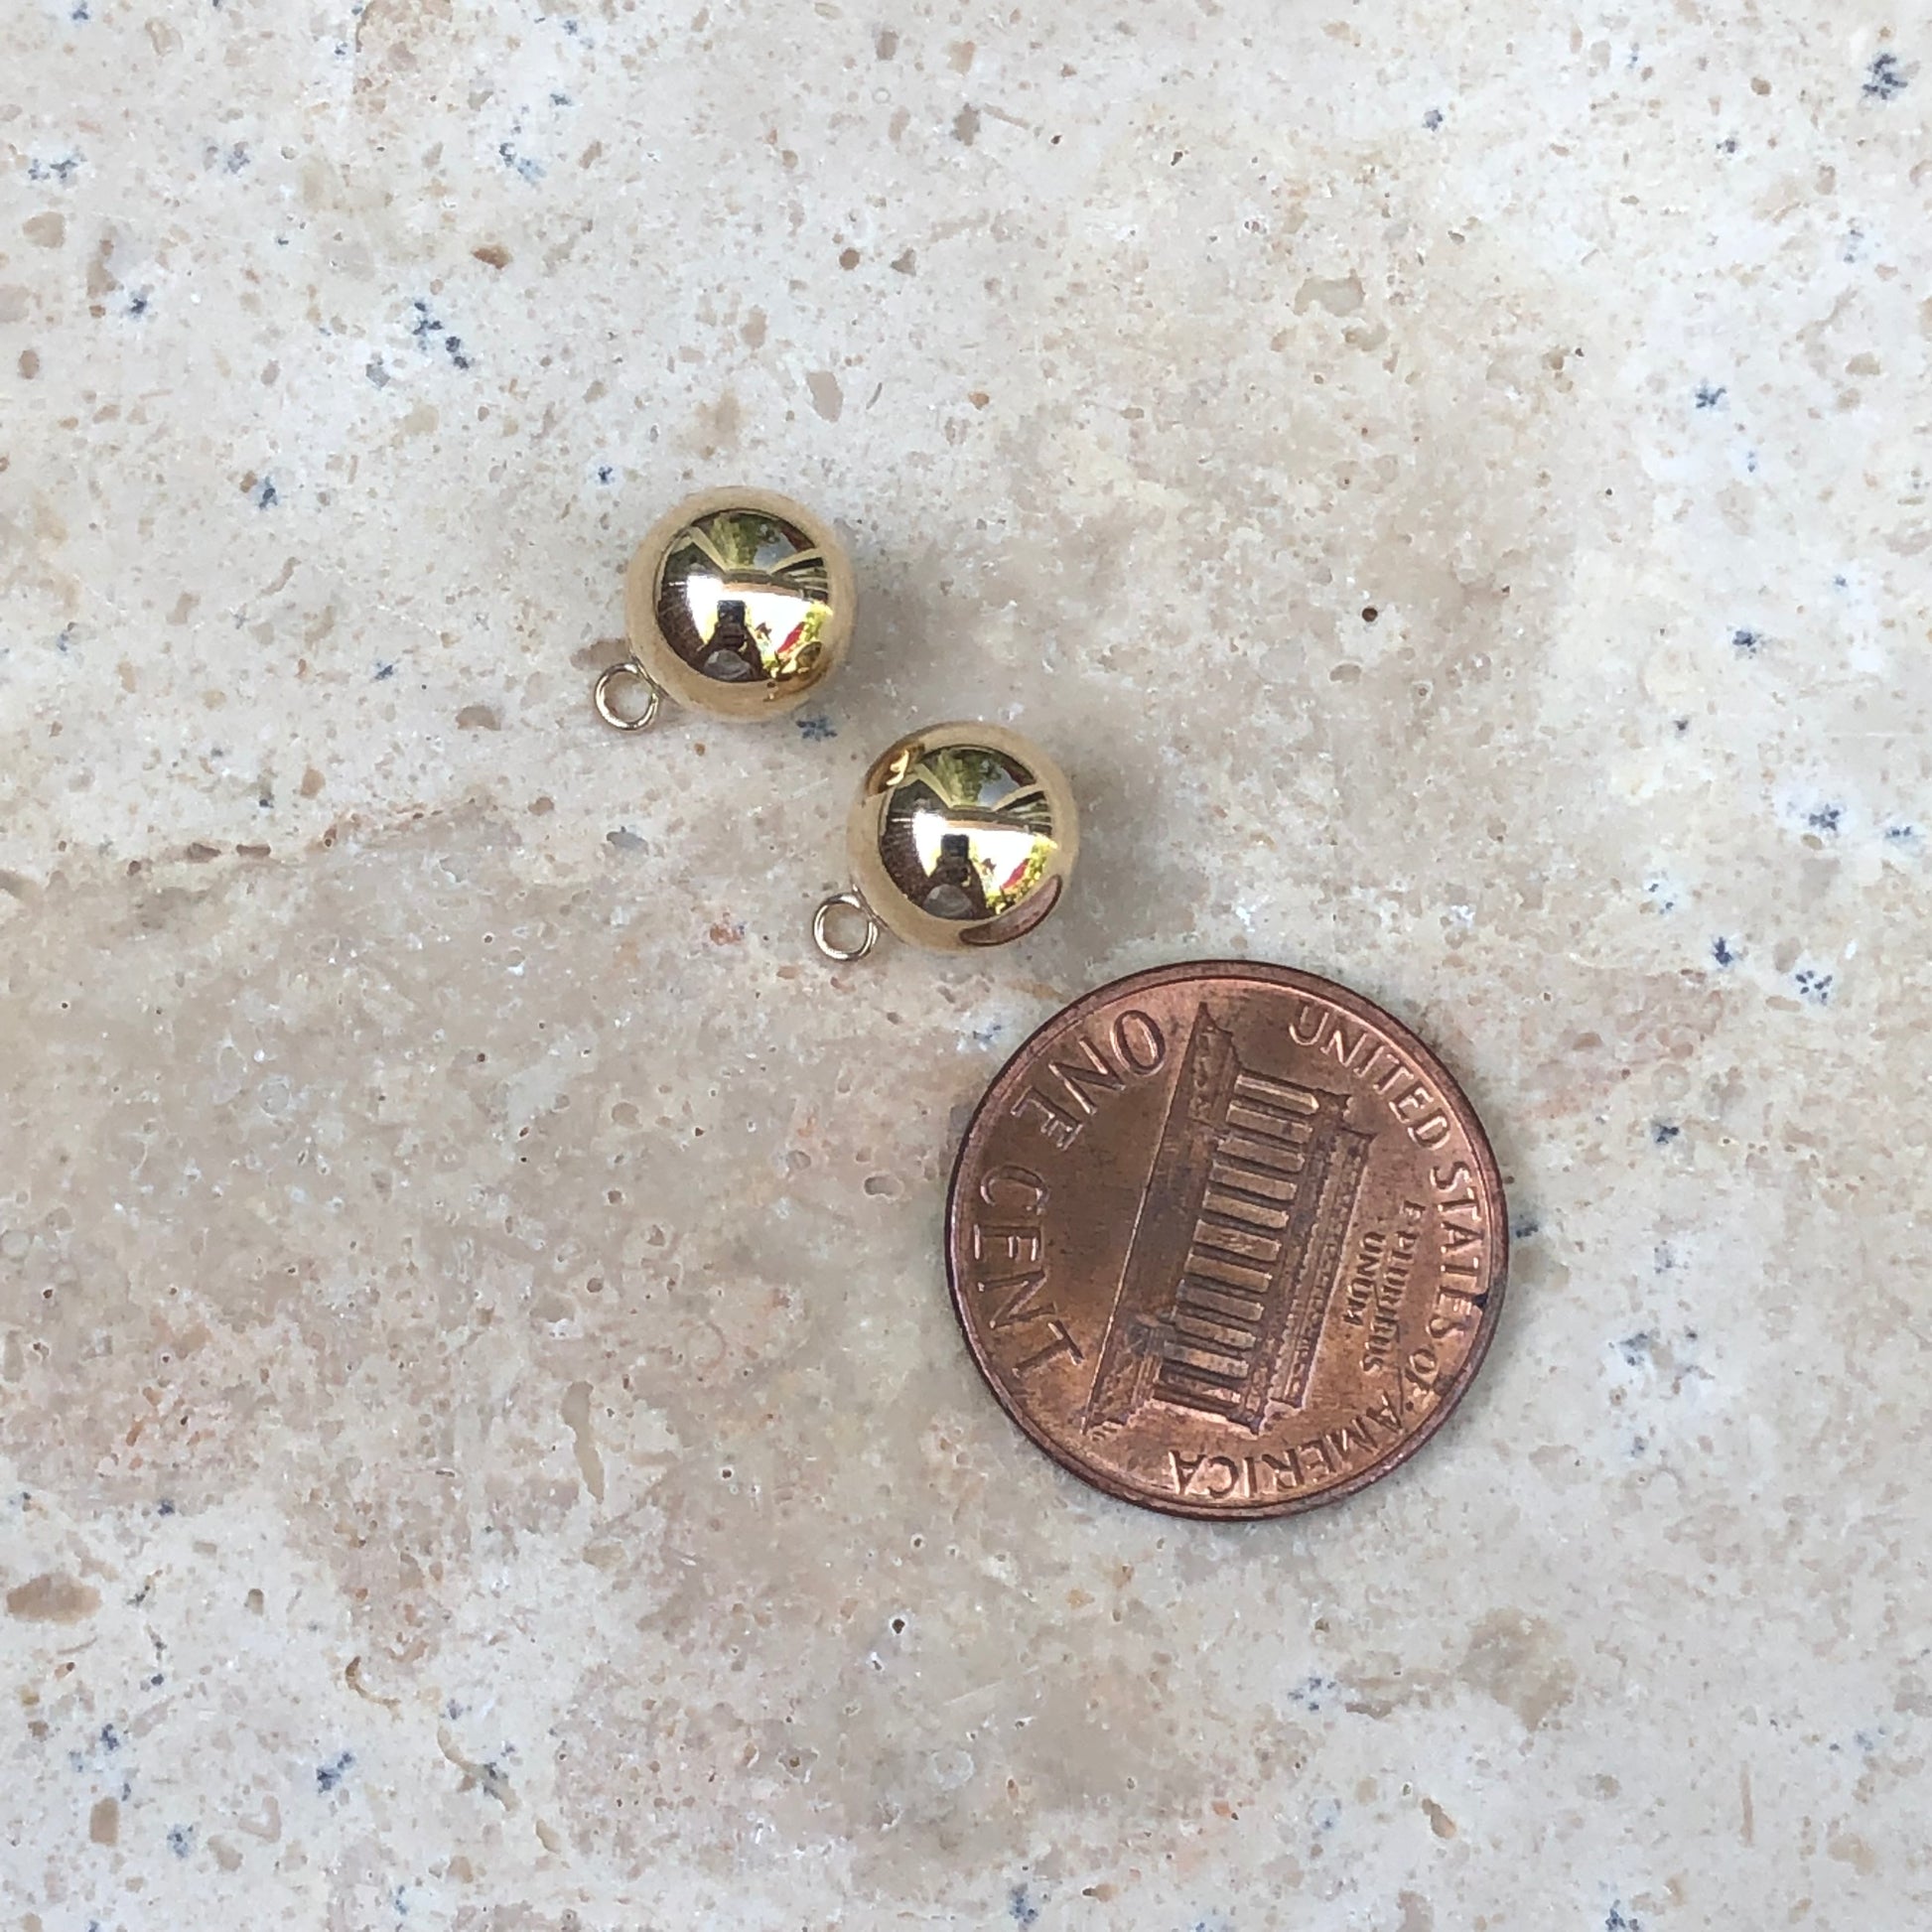 14KT Yellow Gold Ball Earring Charms, 14KT Yellow Gold Ball Earring Charms - Legacy Saint Jewelry